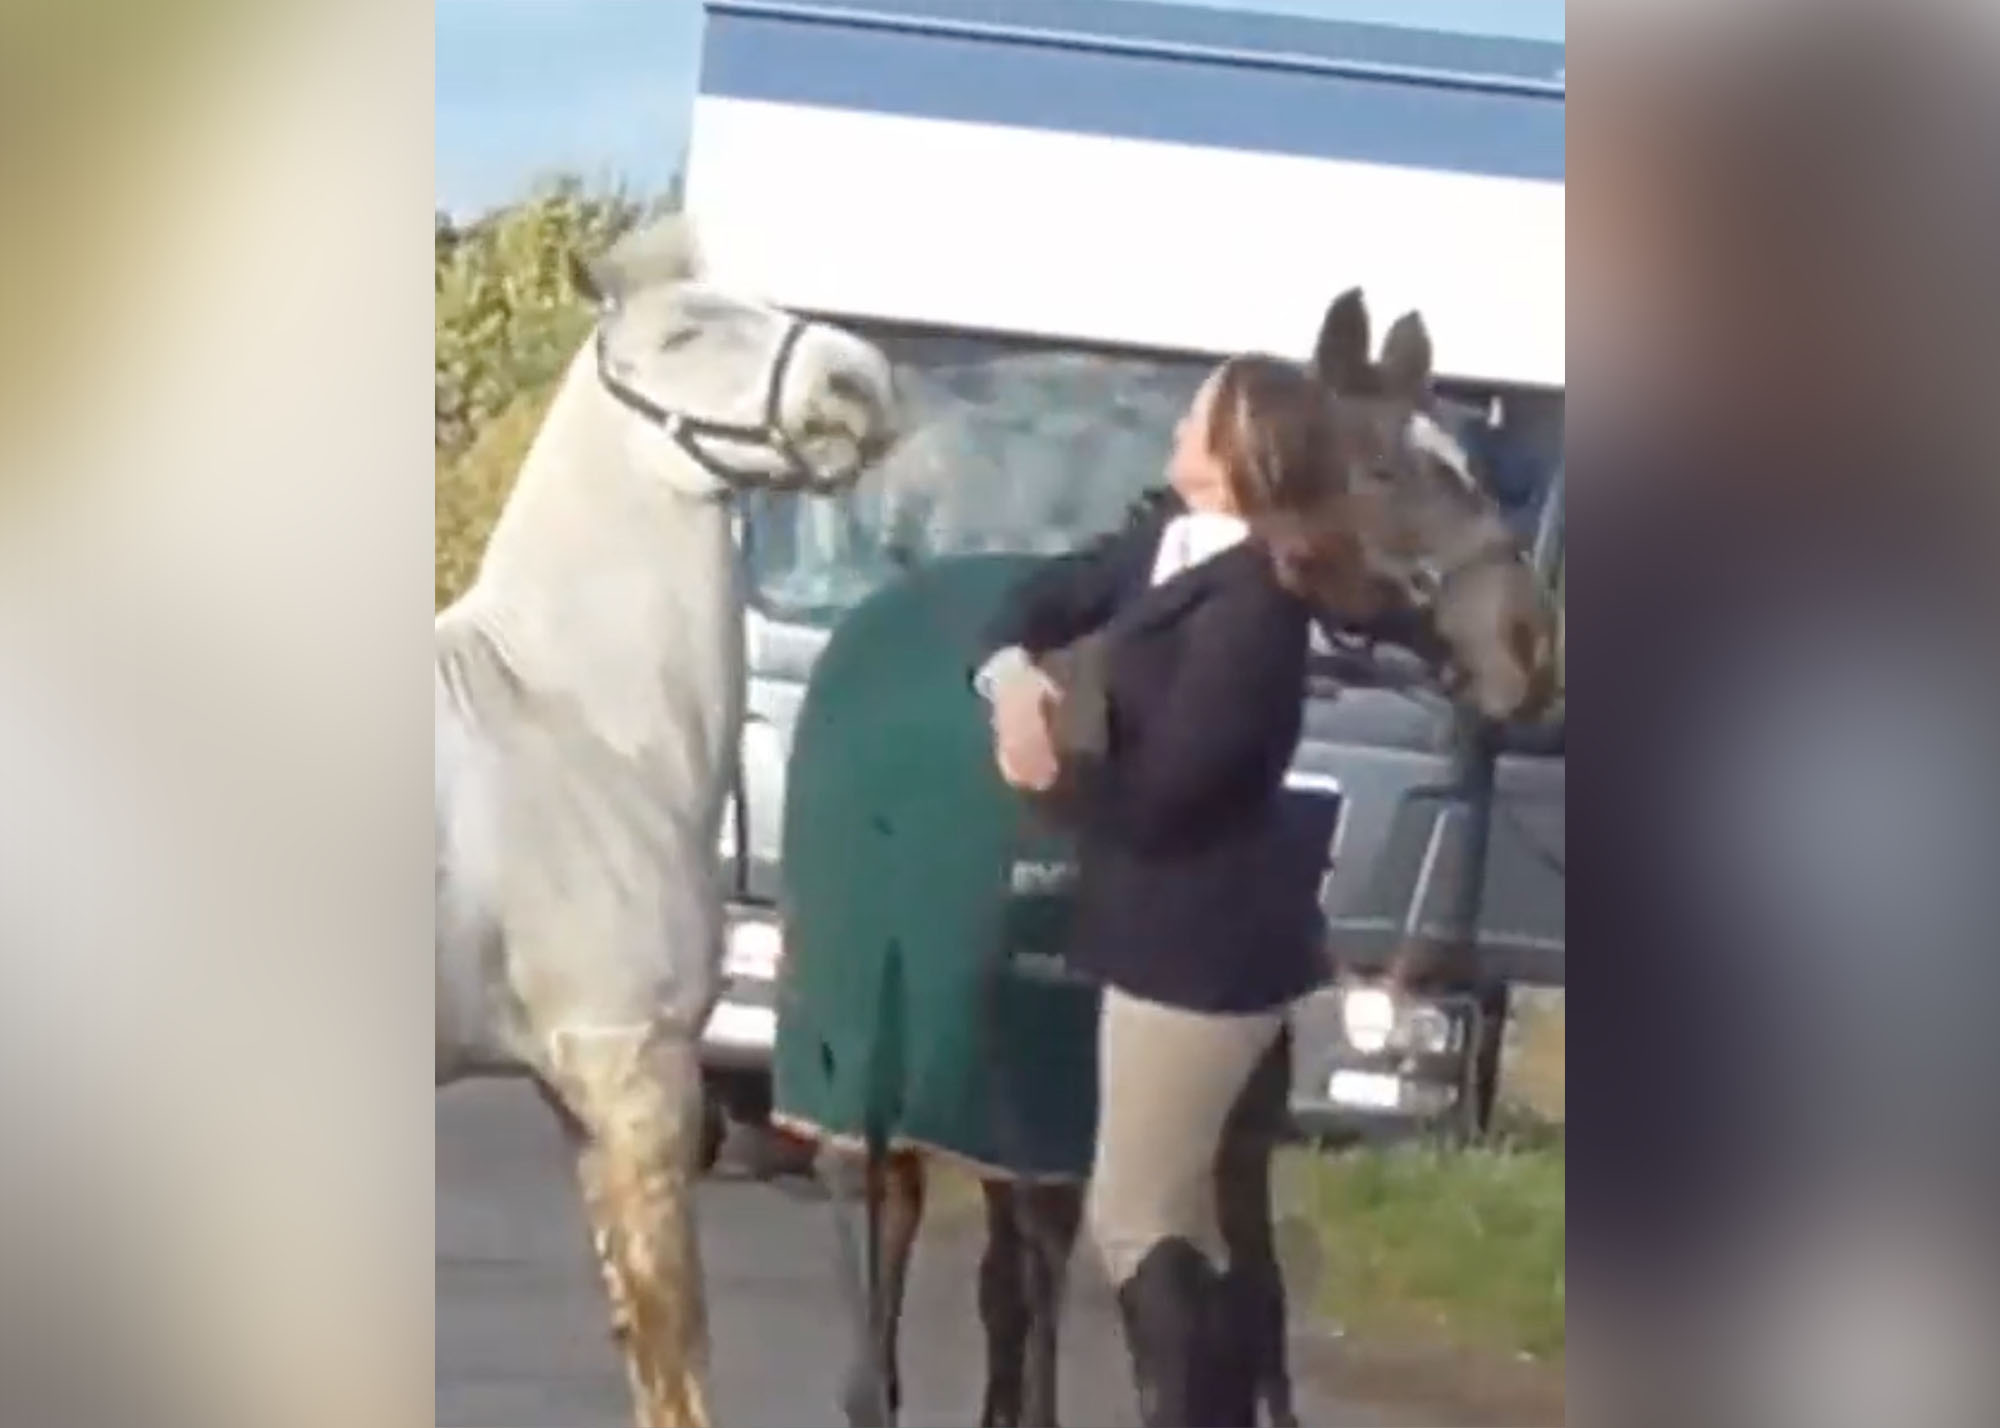 A still from the disturbing video shows Moulds beating the horse as she leads it back to the trailer.